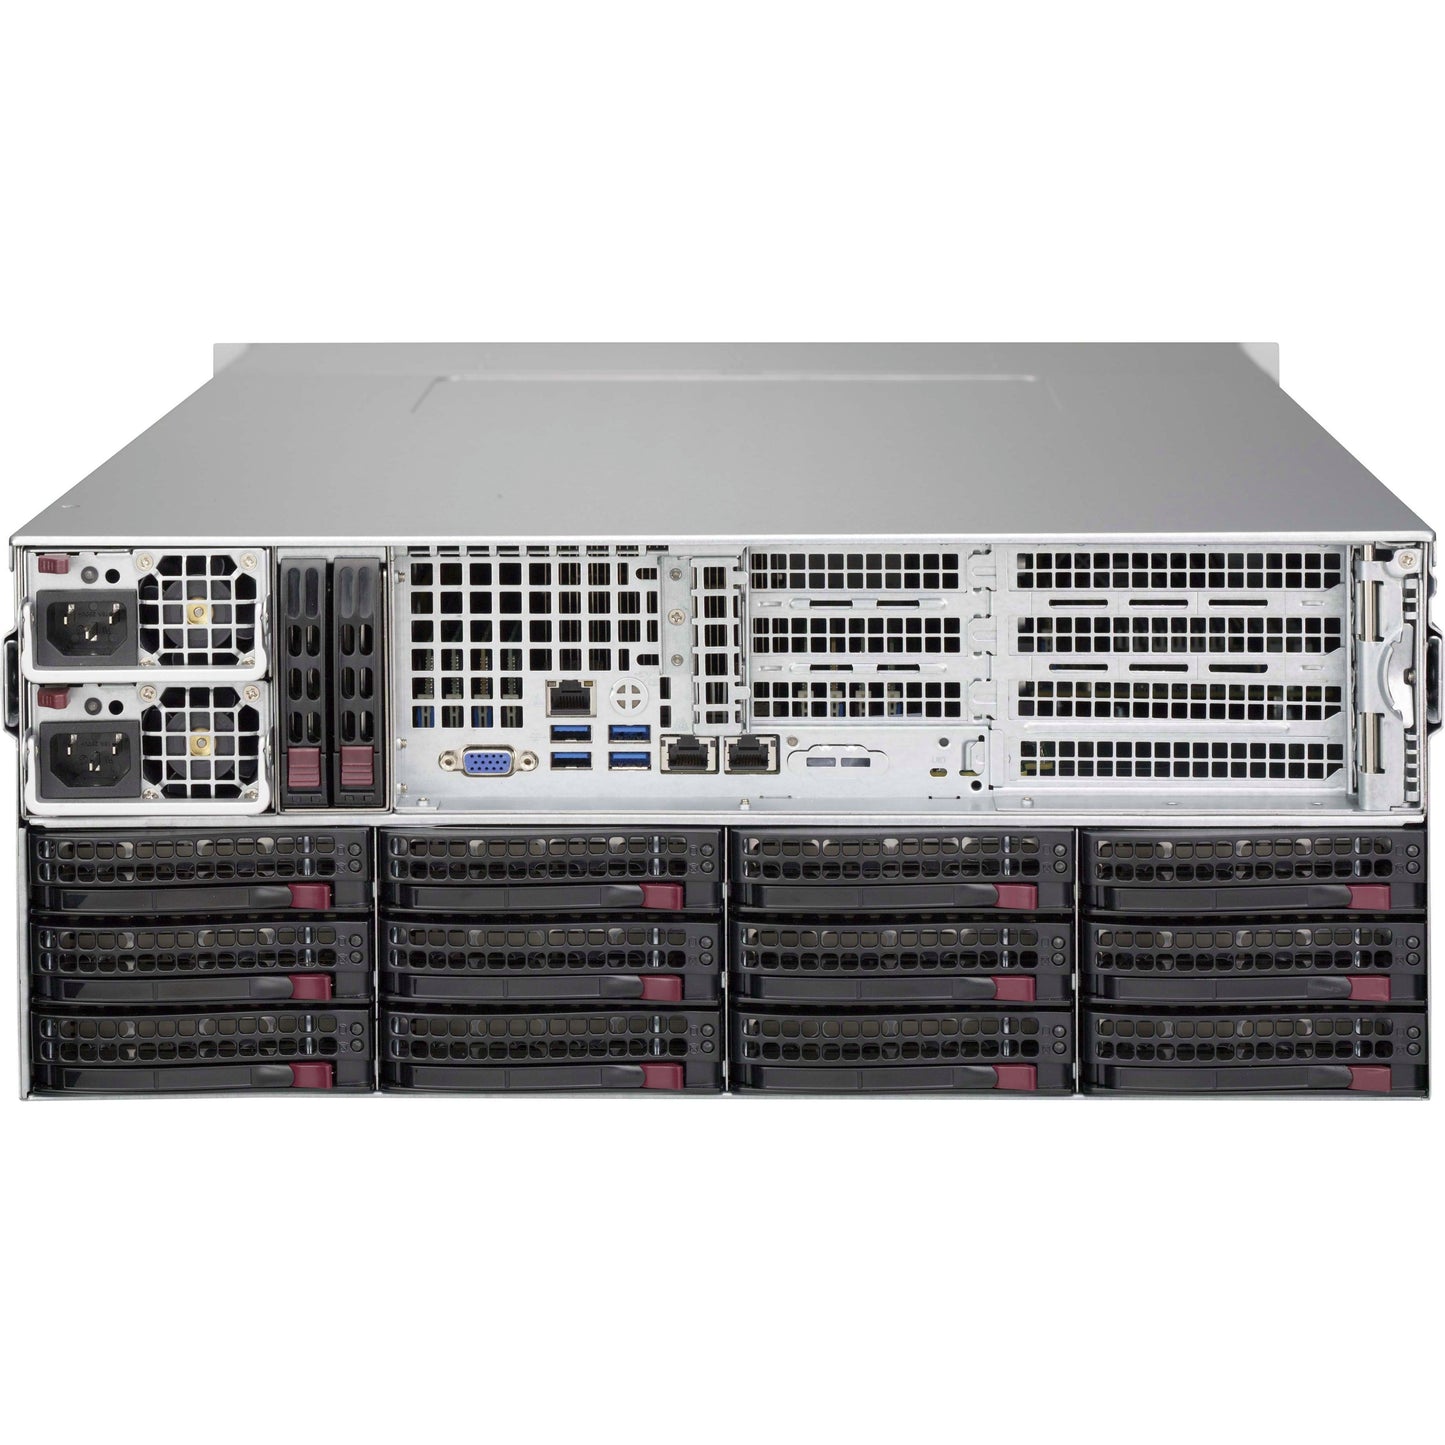 Supermicro SuperChassis 847BE2C-R1K28WB (Black)